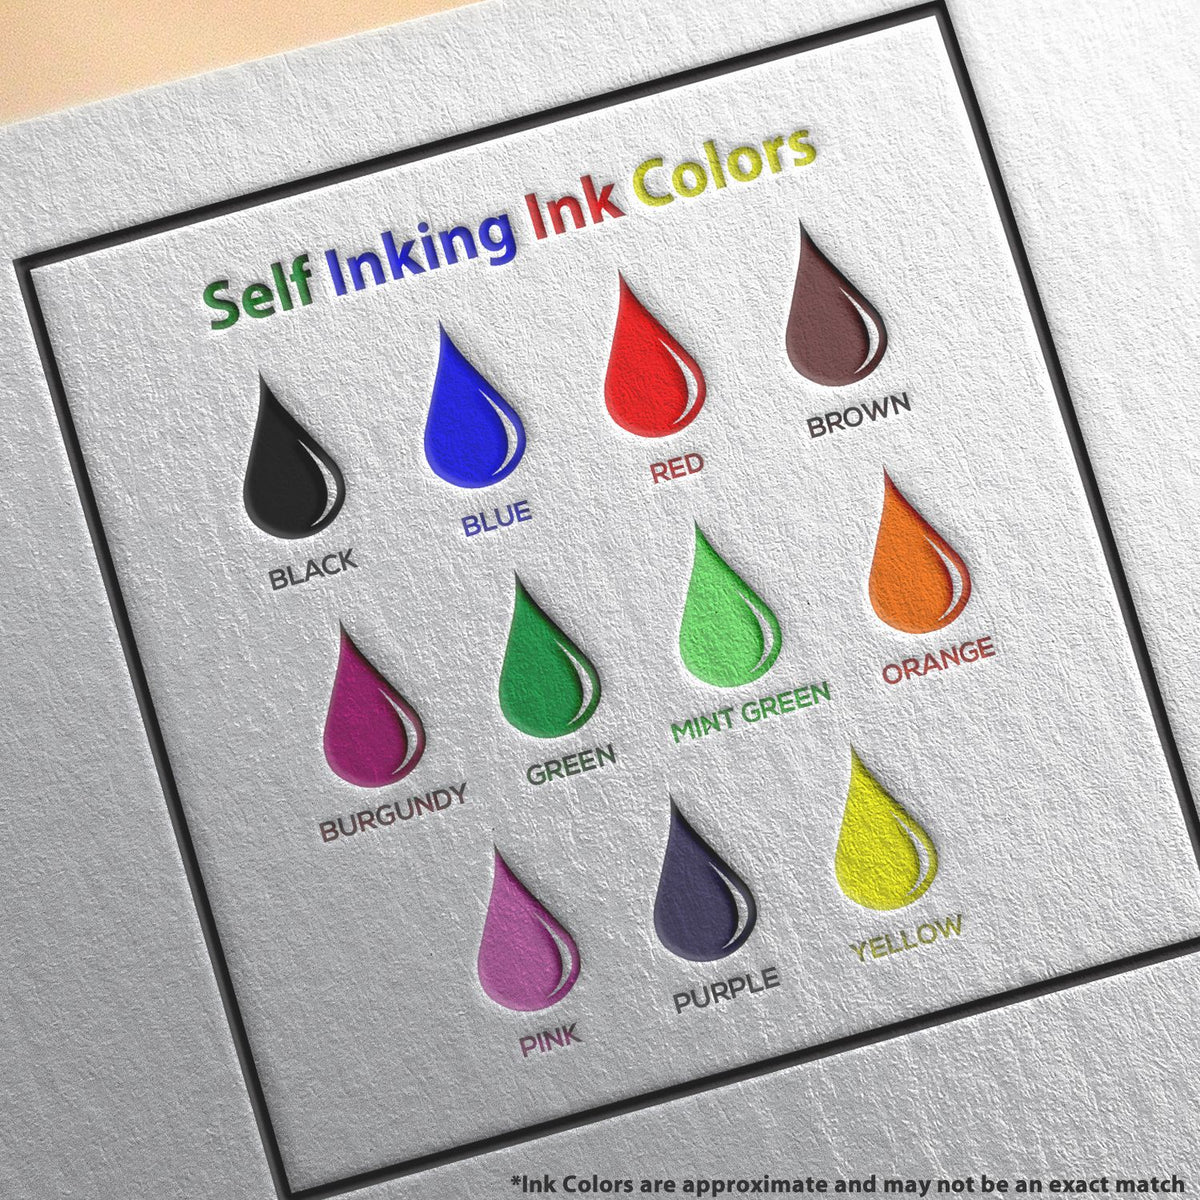 Self Inking Ink Color Choices